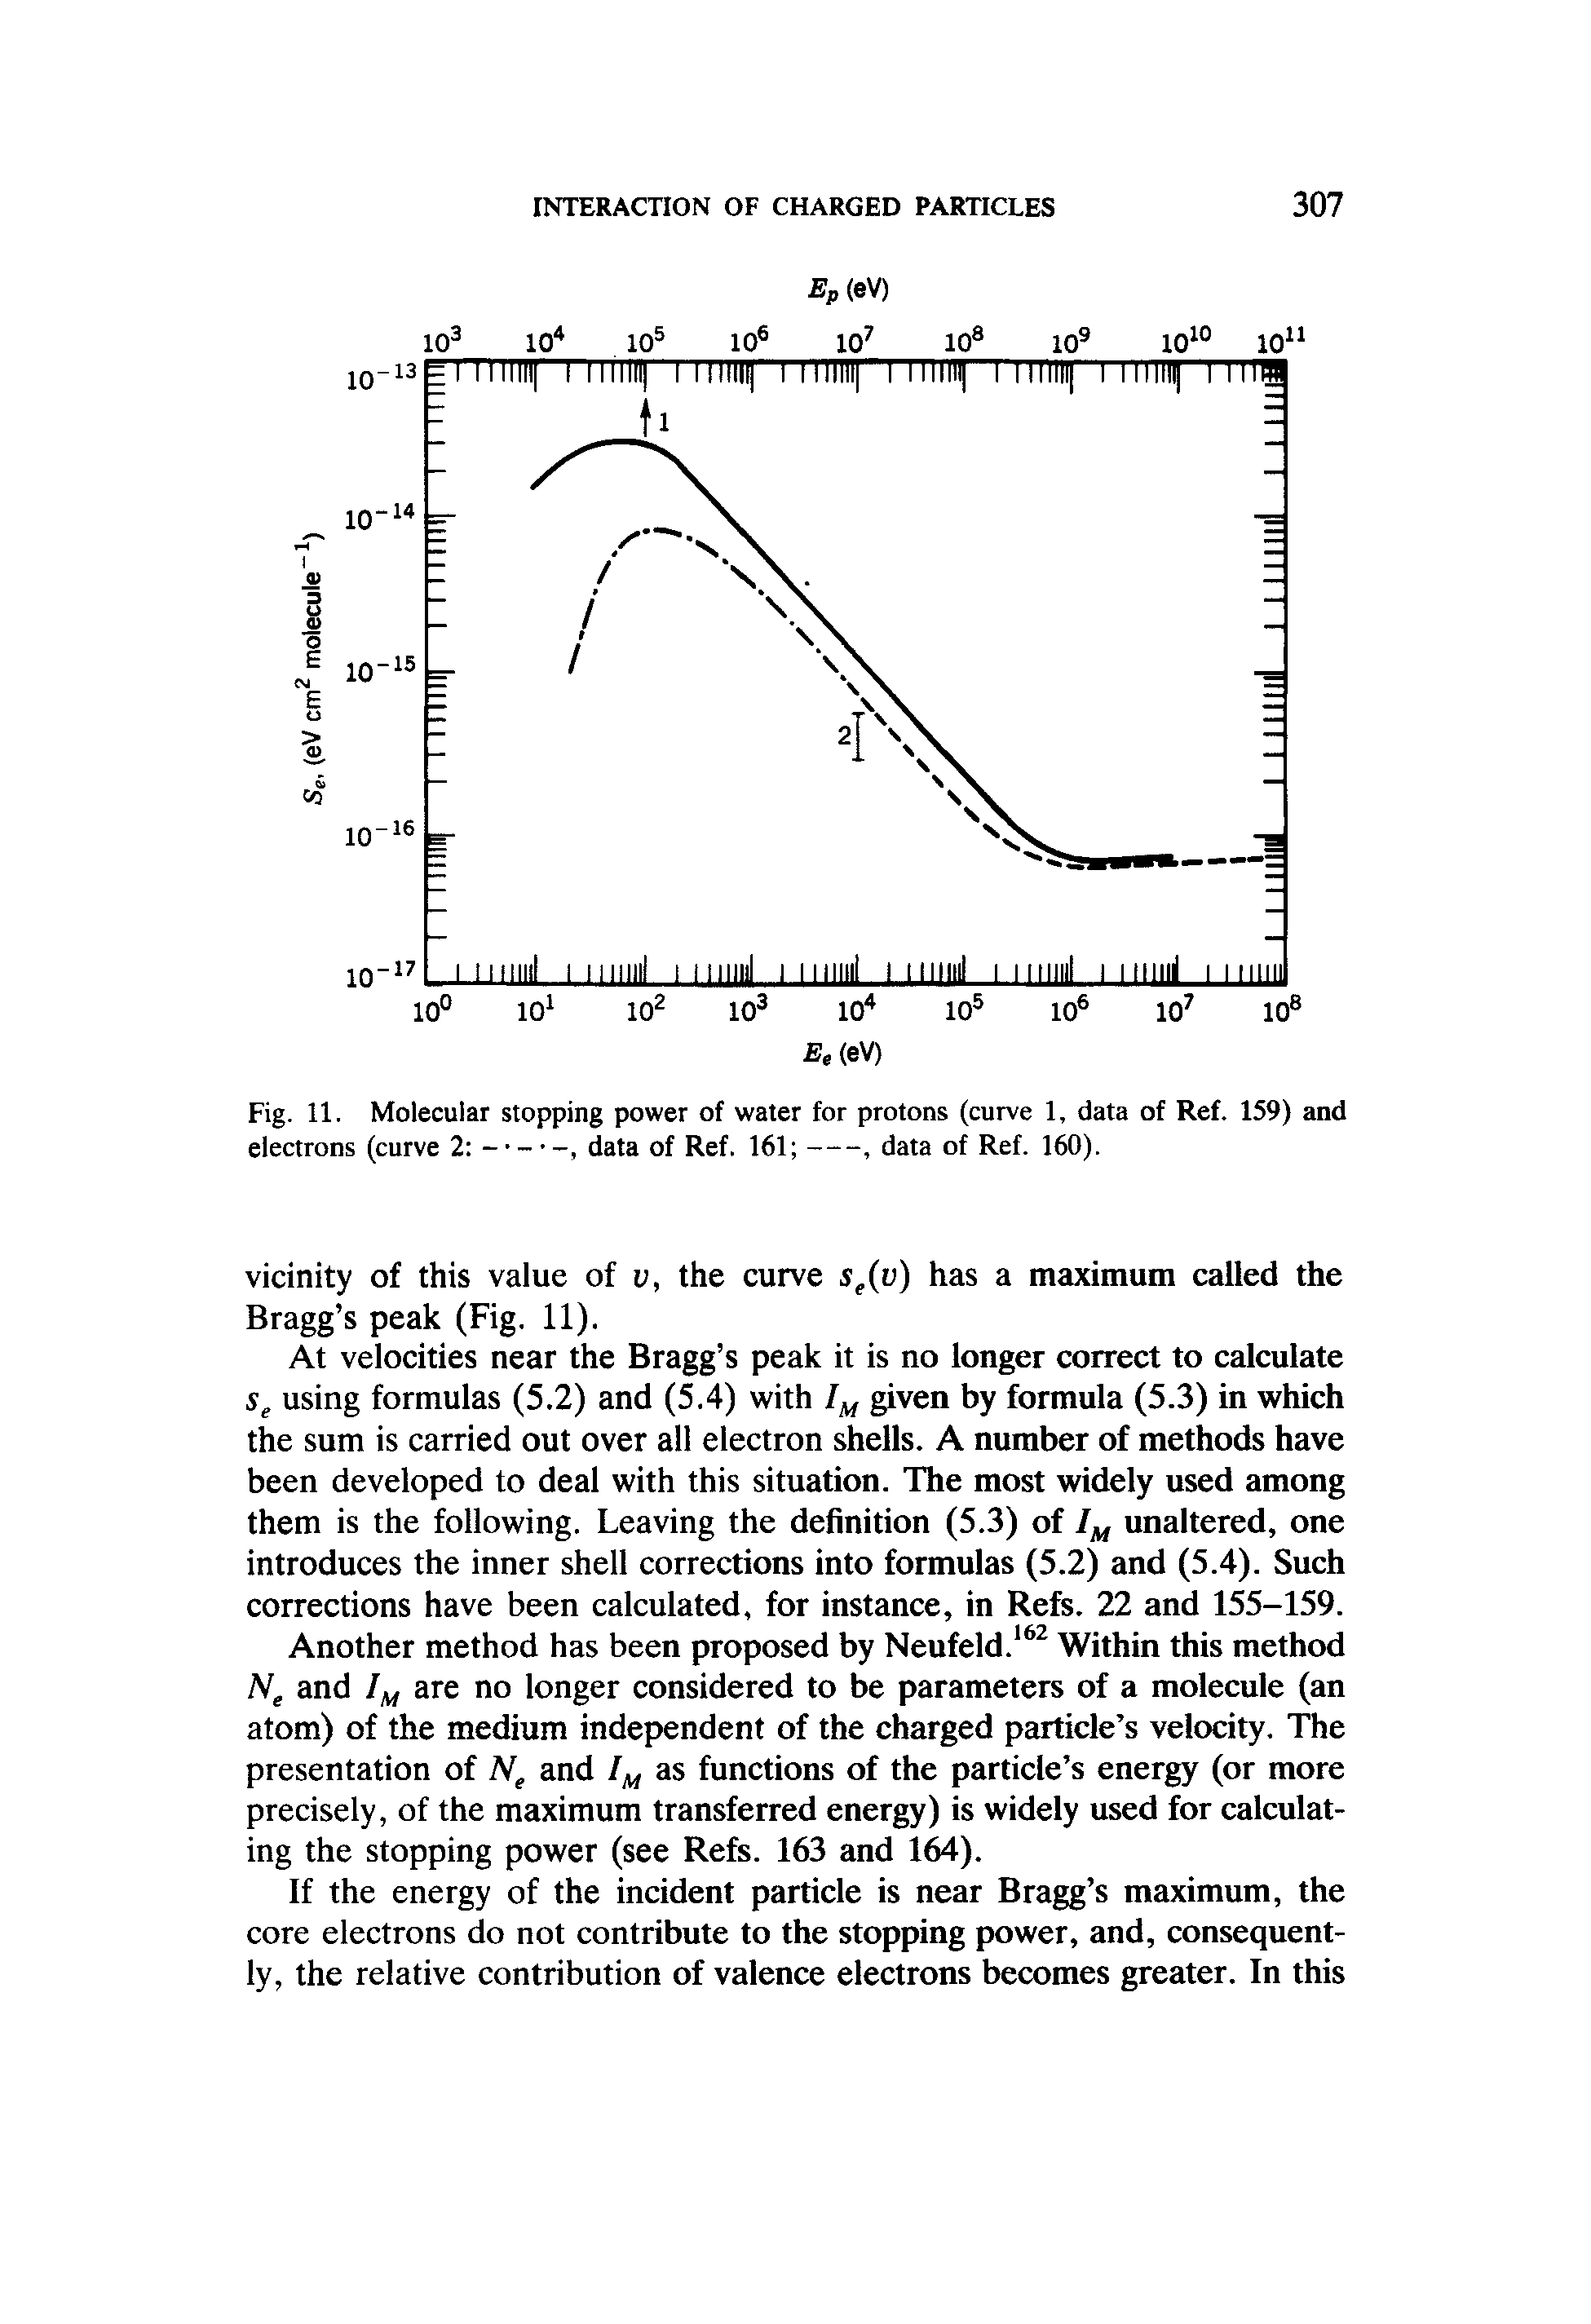 Fig. 11. Molecular stopping power of water for protons (curve 1, data of Ref. 159) and electrons (curve 2 -----, data of Ref. 161 ----, data of Ref. 160).